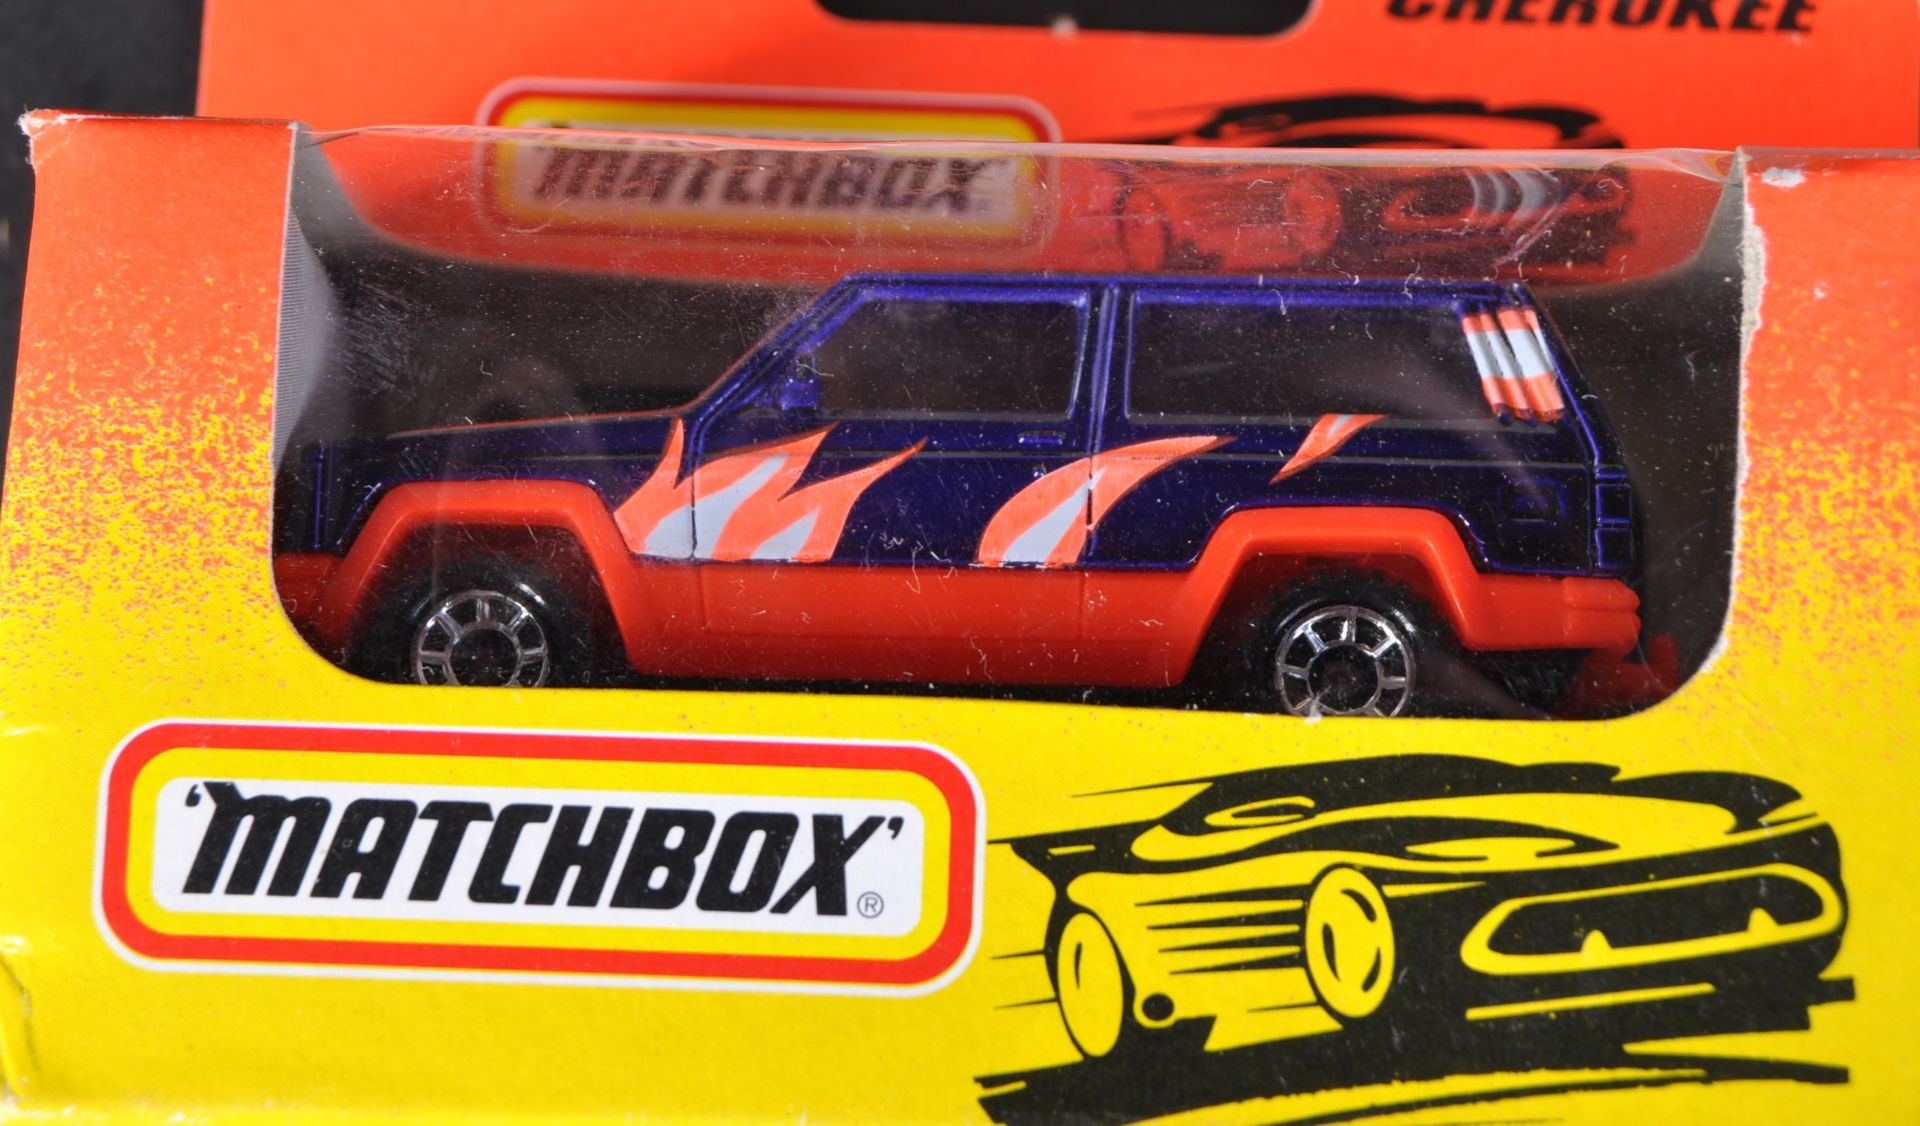 COLLECTION OF VINTAGE MATCHBOX DIECAST MODEL CARS - Image 7 of 7